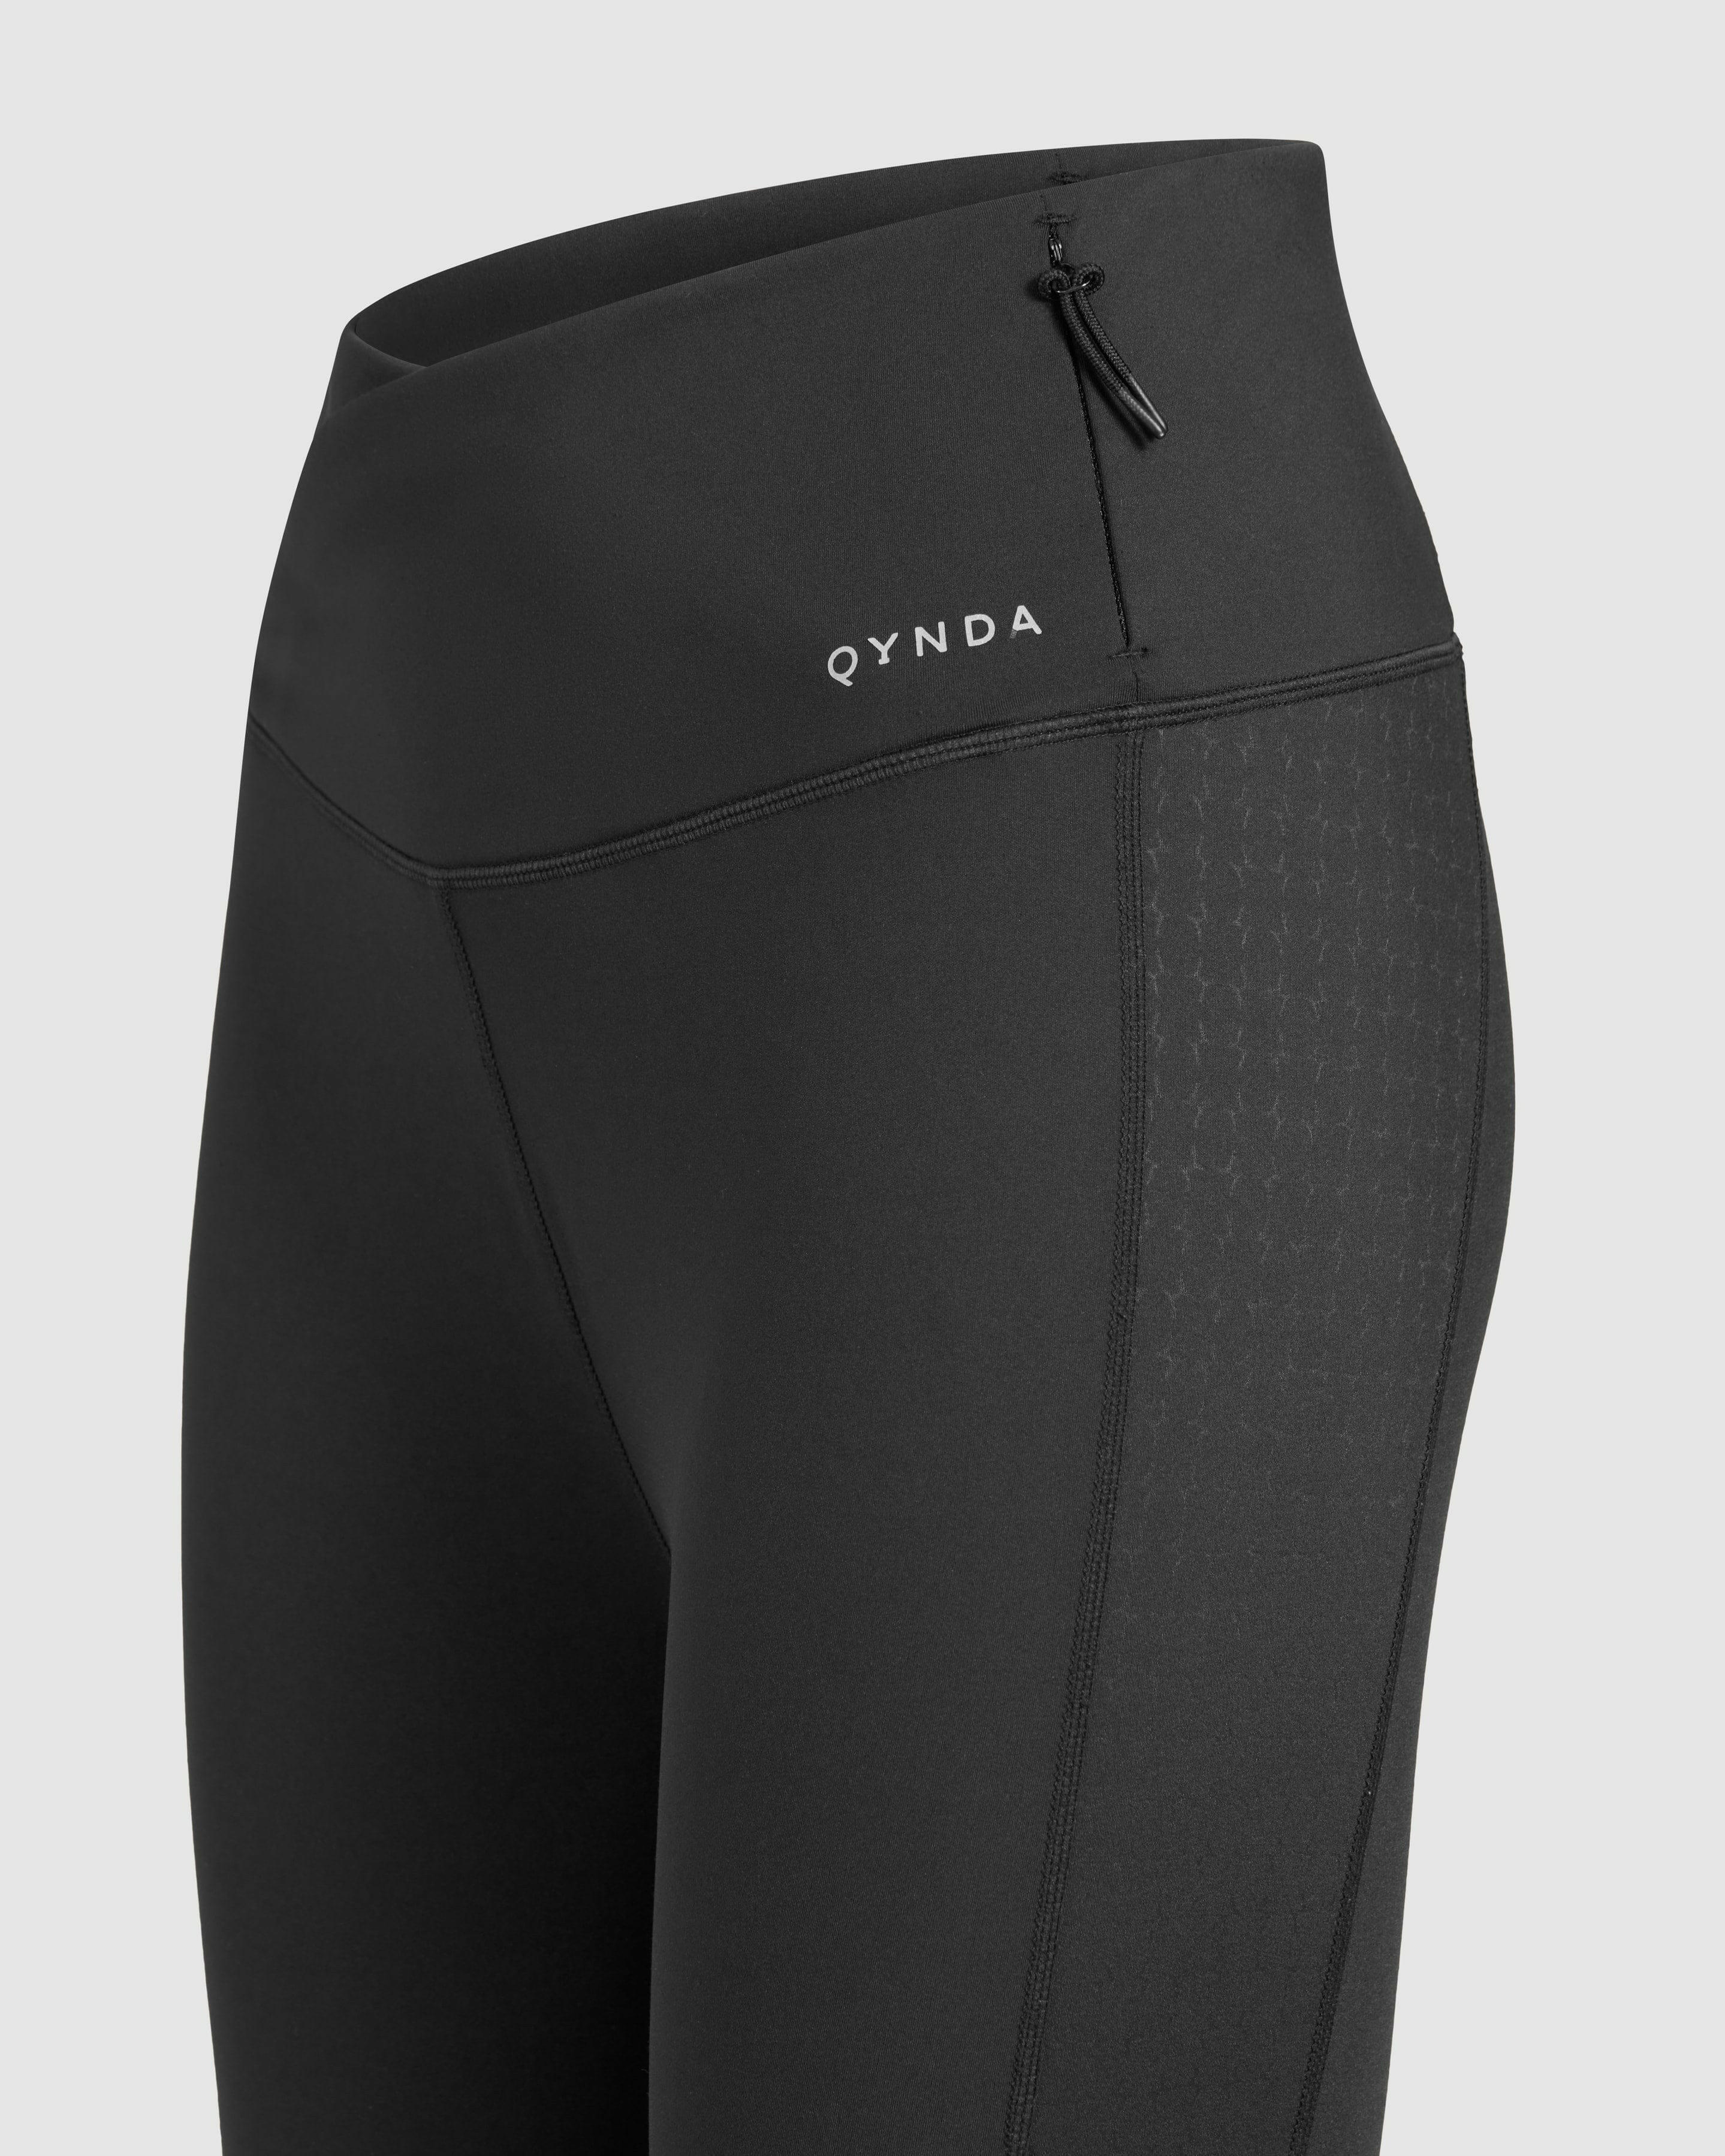 Close-up of a black sports LADINA LEGGINGS featuring a subtle QYNDA brand logo and a drawstring waist detail.